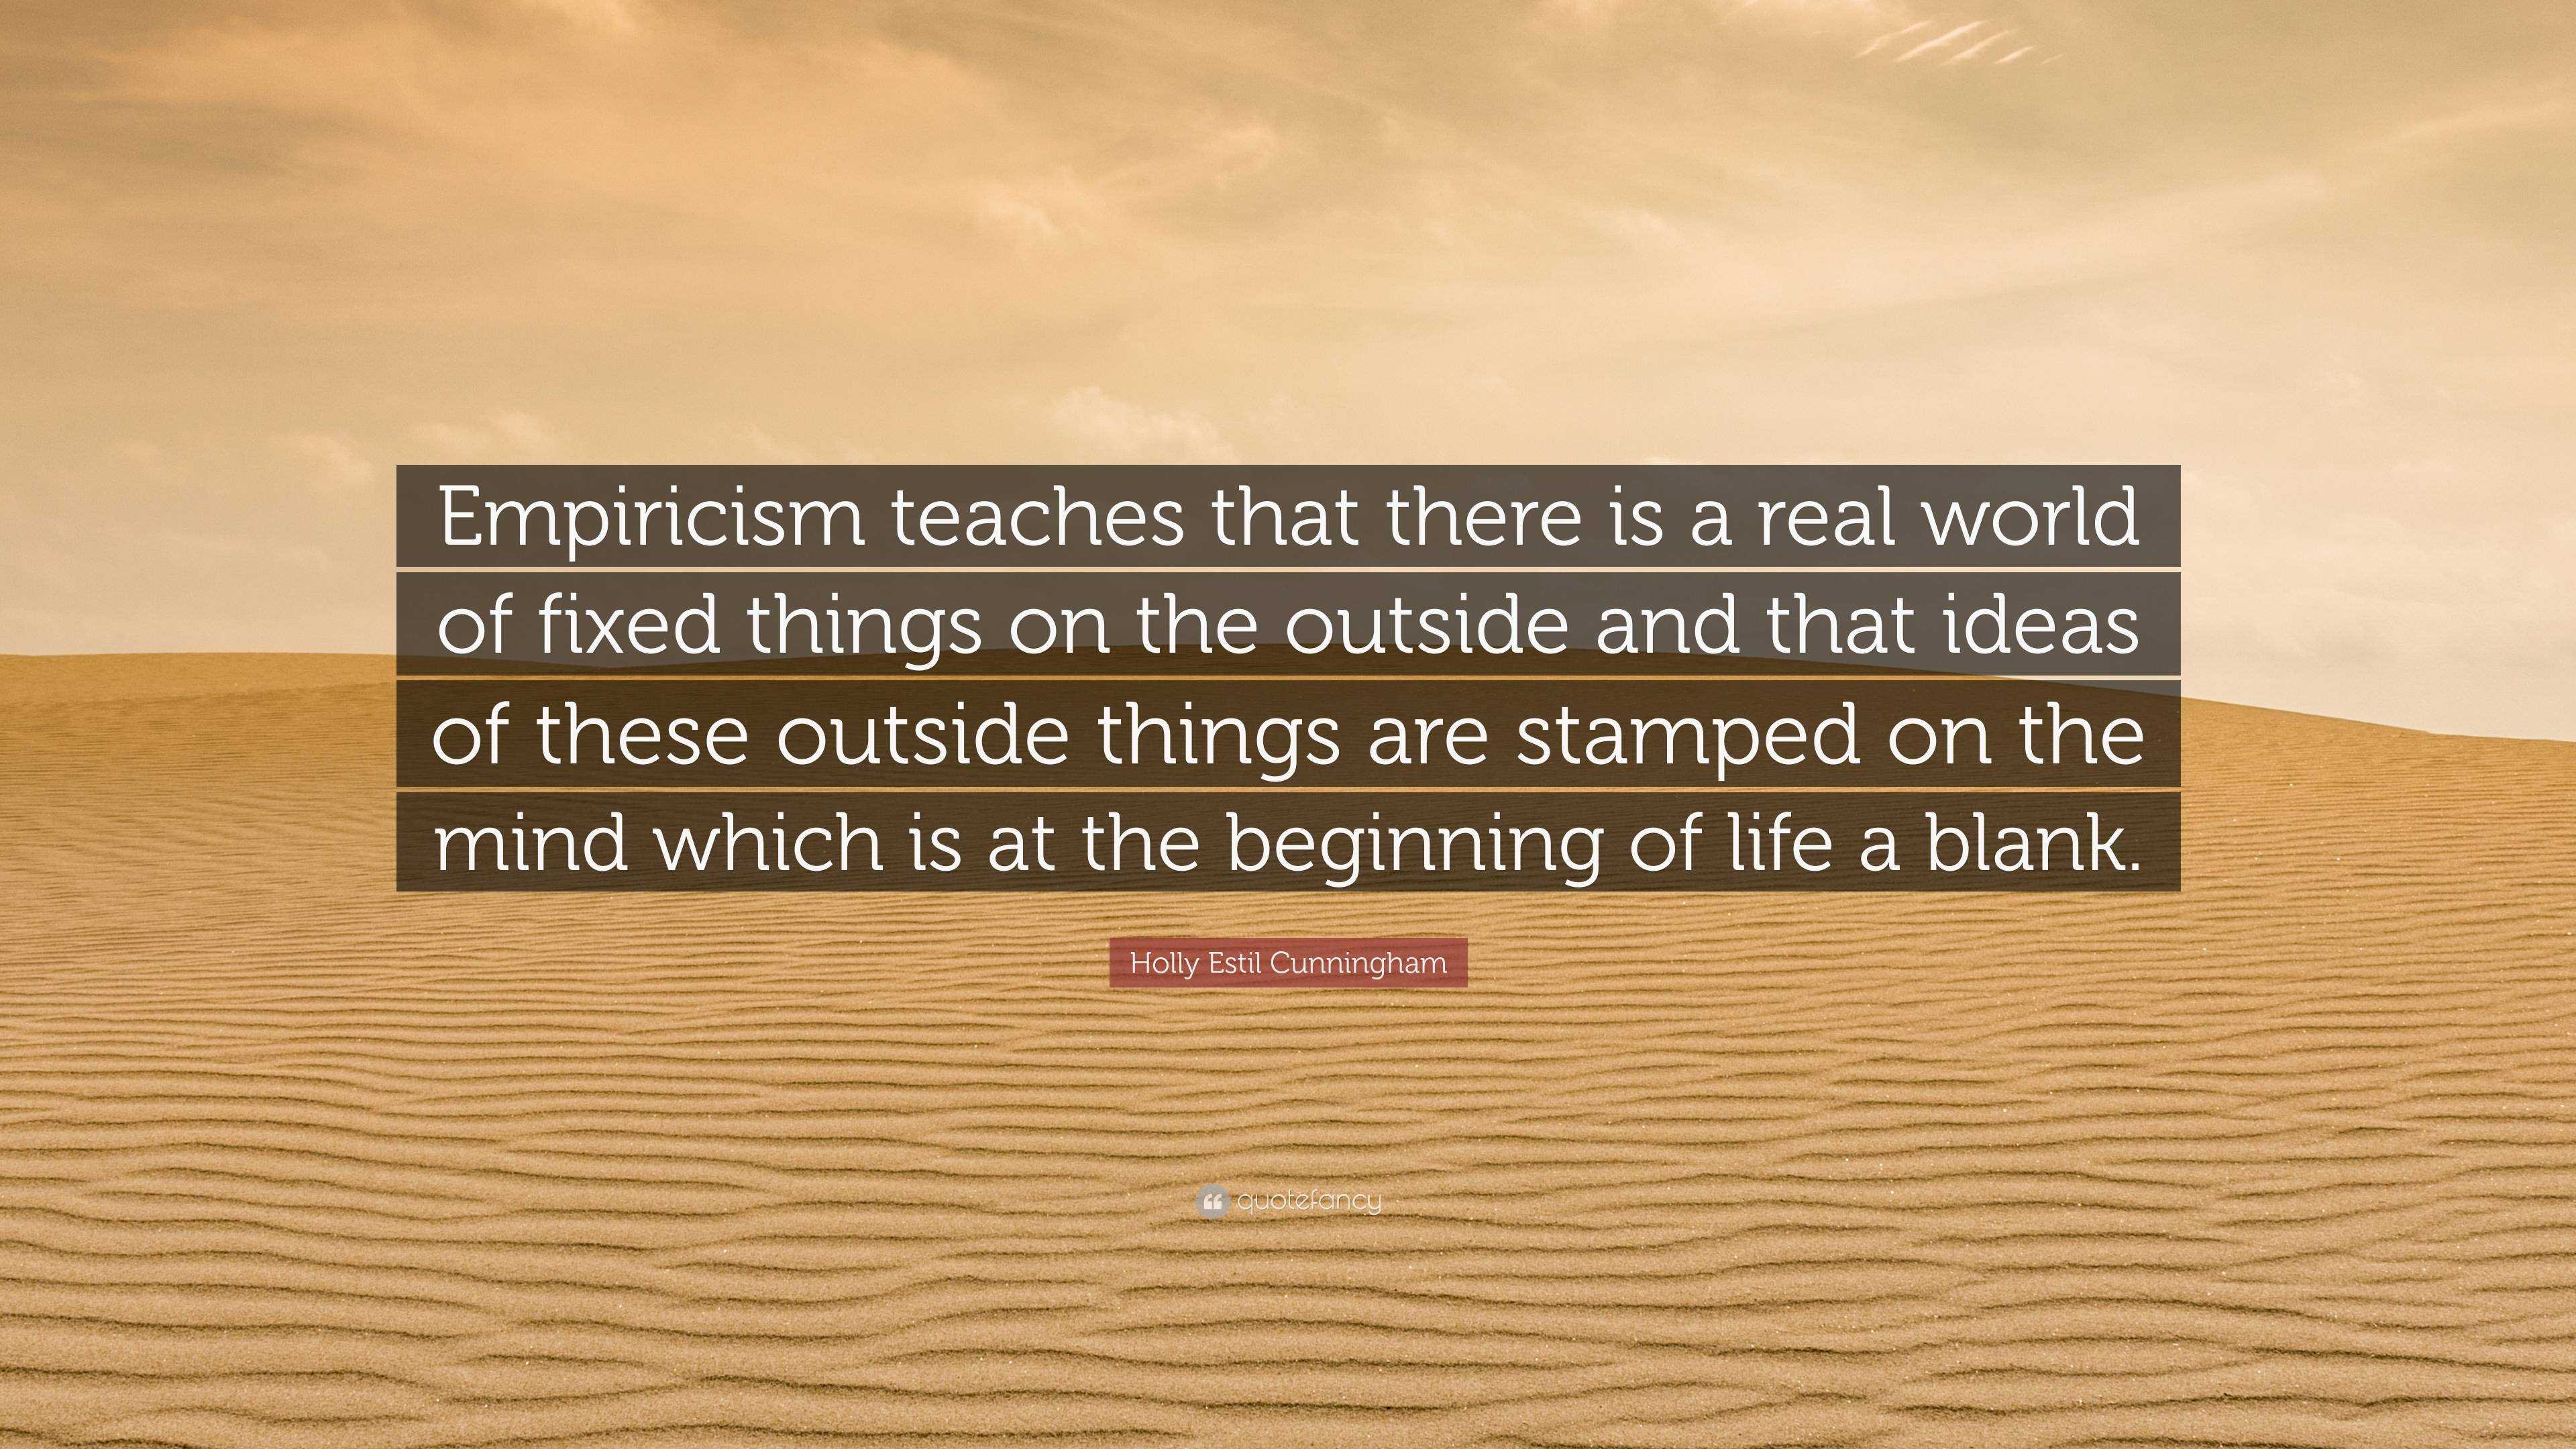 Holly Estil Cunningham Quote: “Empiricism teaches that there is a real ...